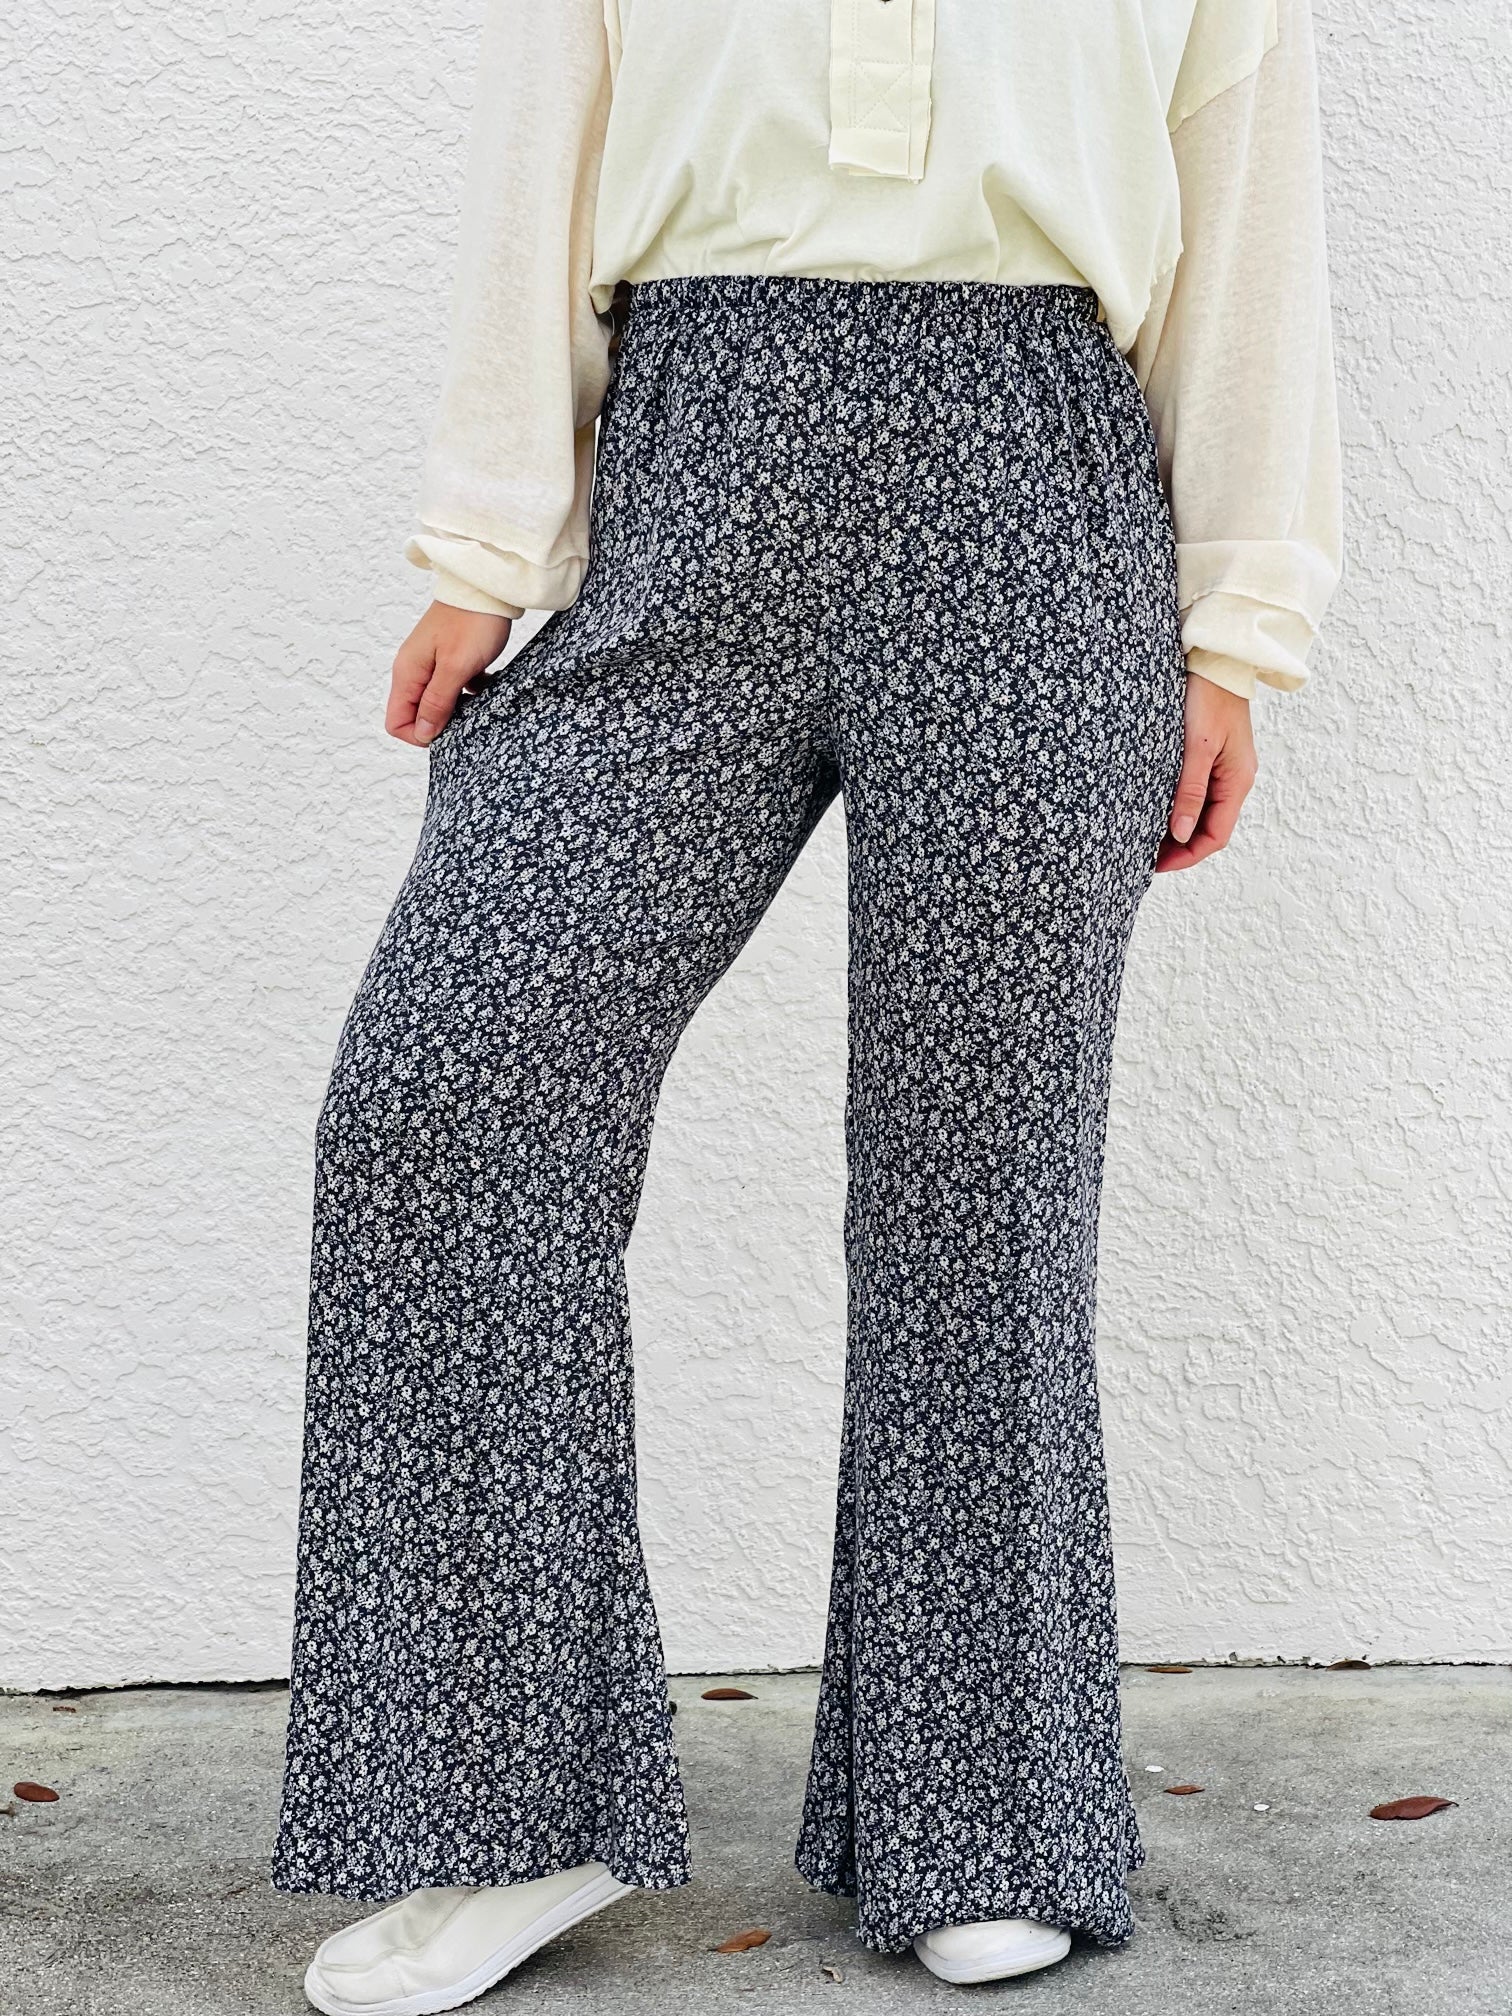 JDY exclusive wide leg pants in cow print - part of a set